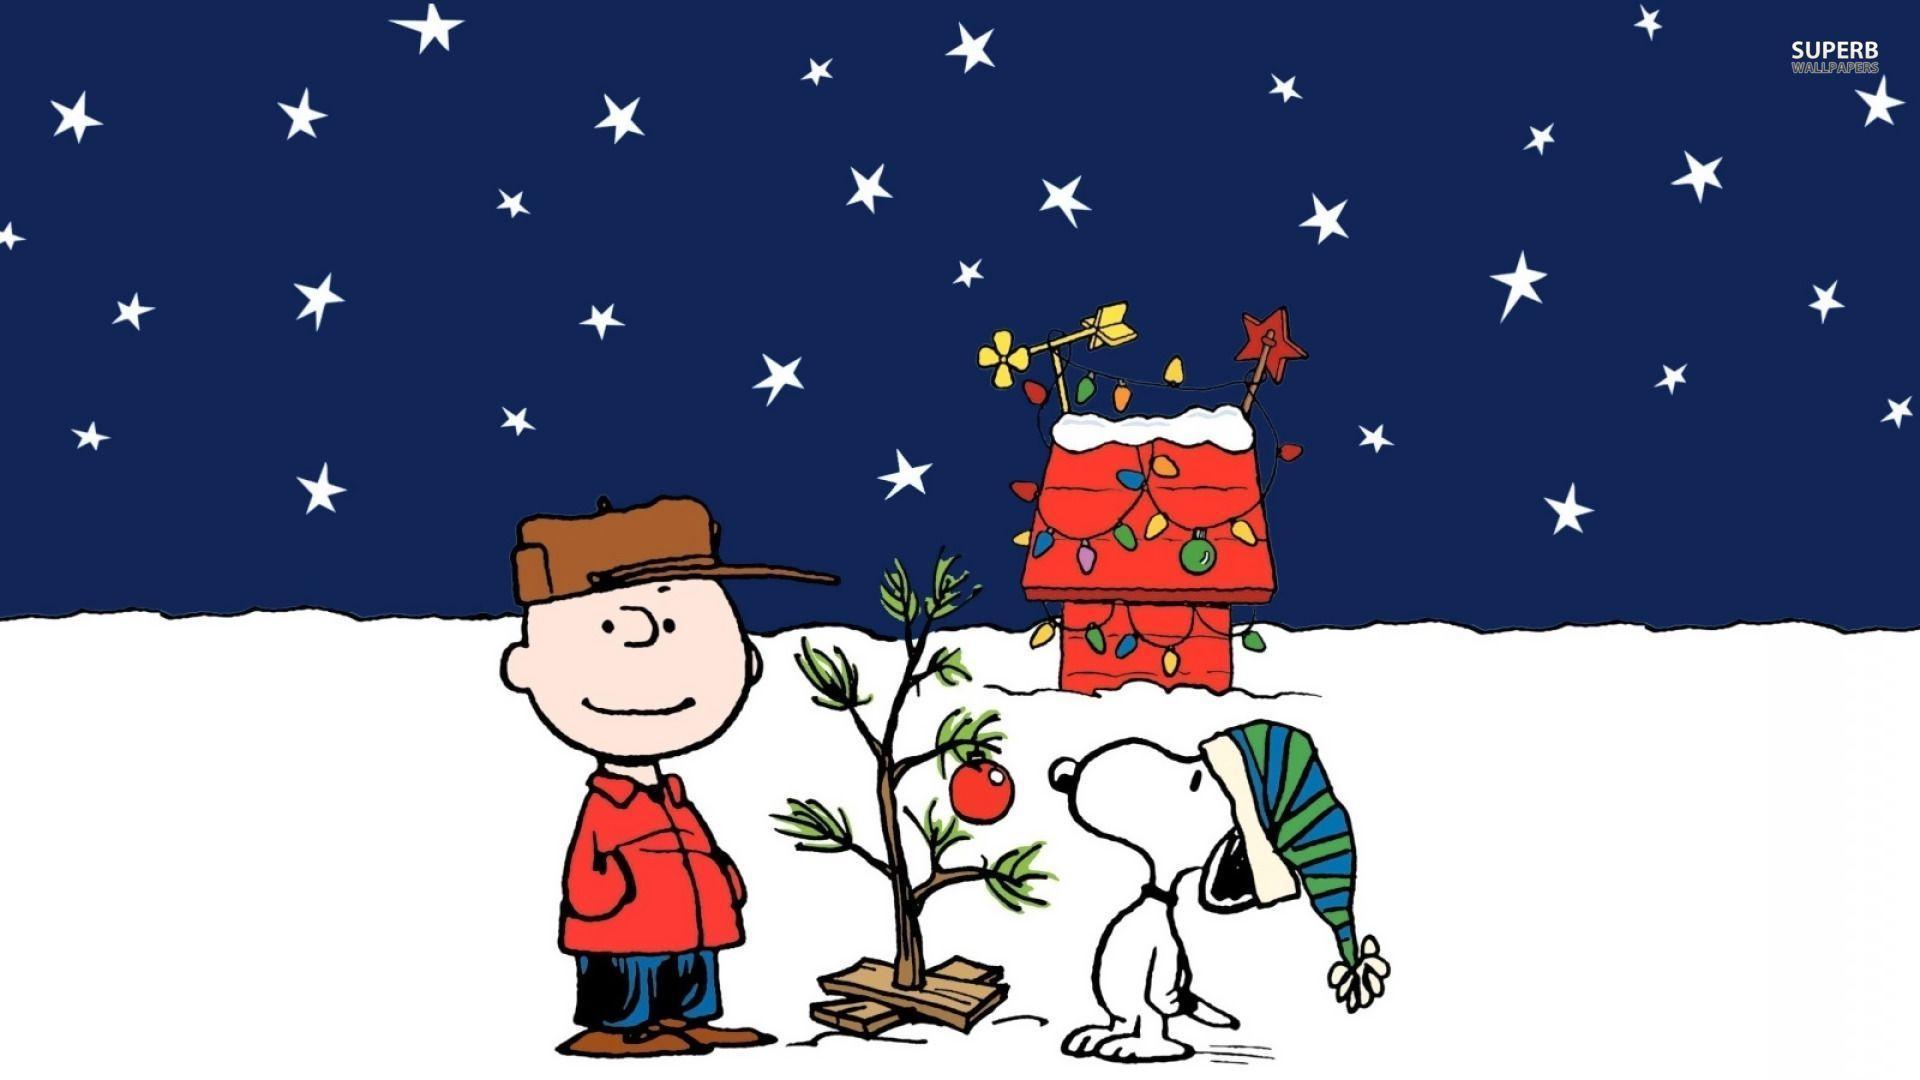 Wallpaper For > Charlie Brown Snoopy Christmas Wallpaper